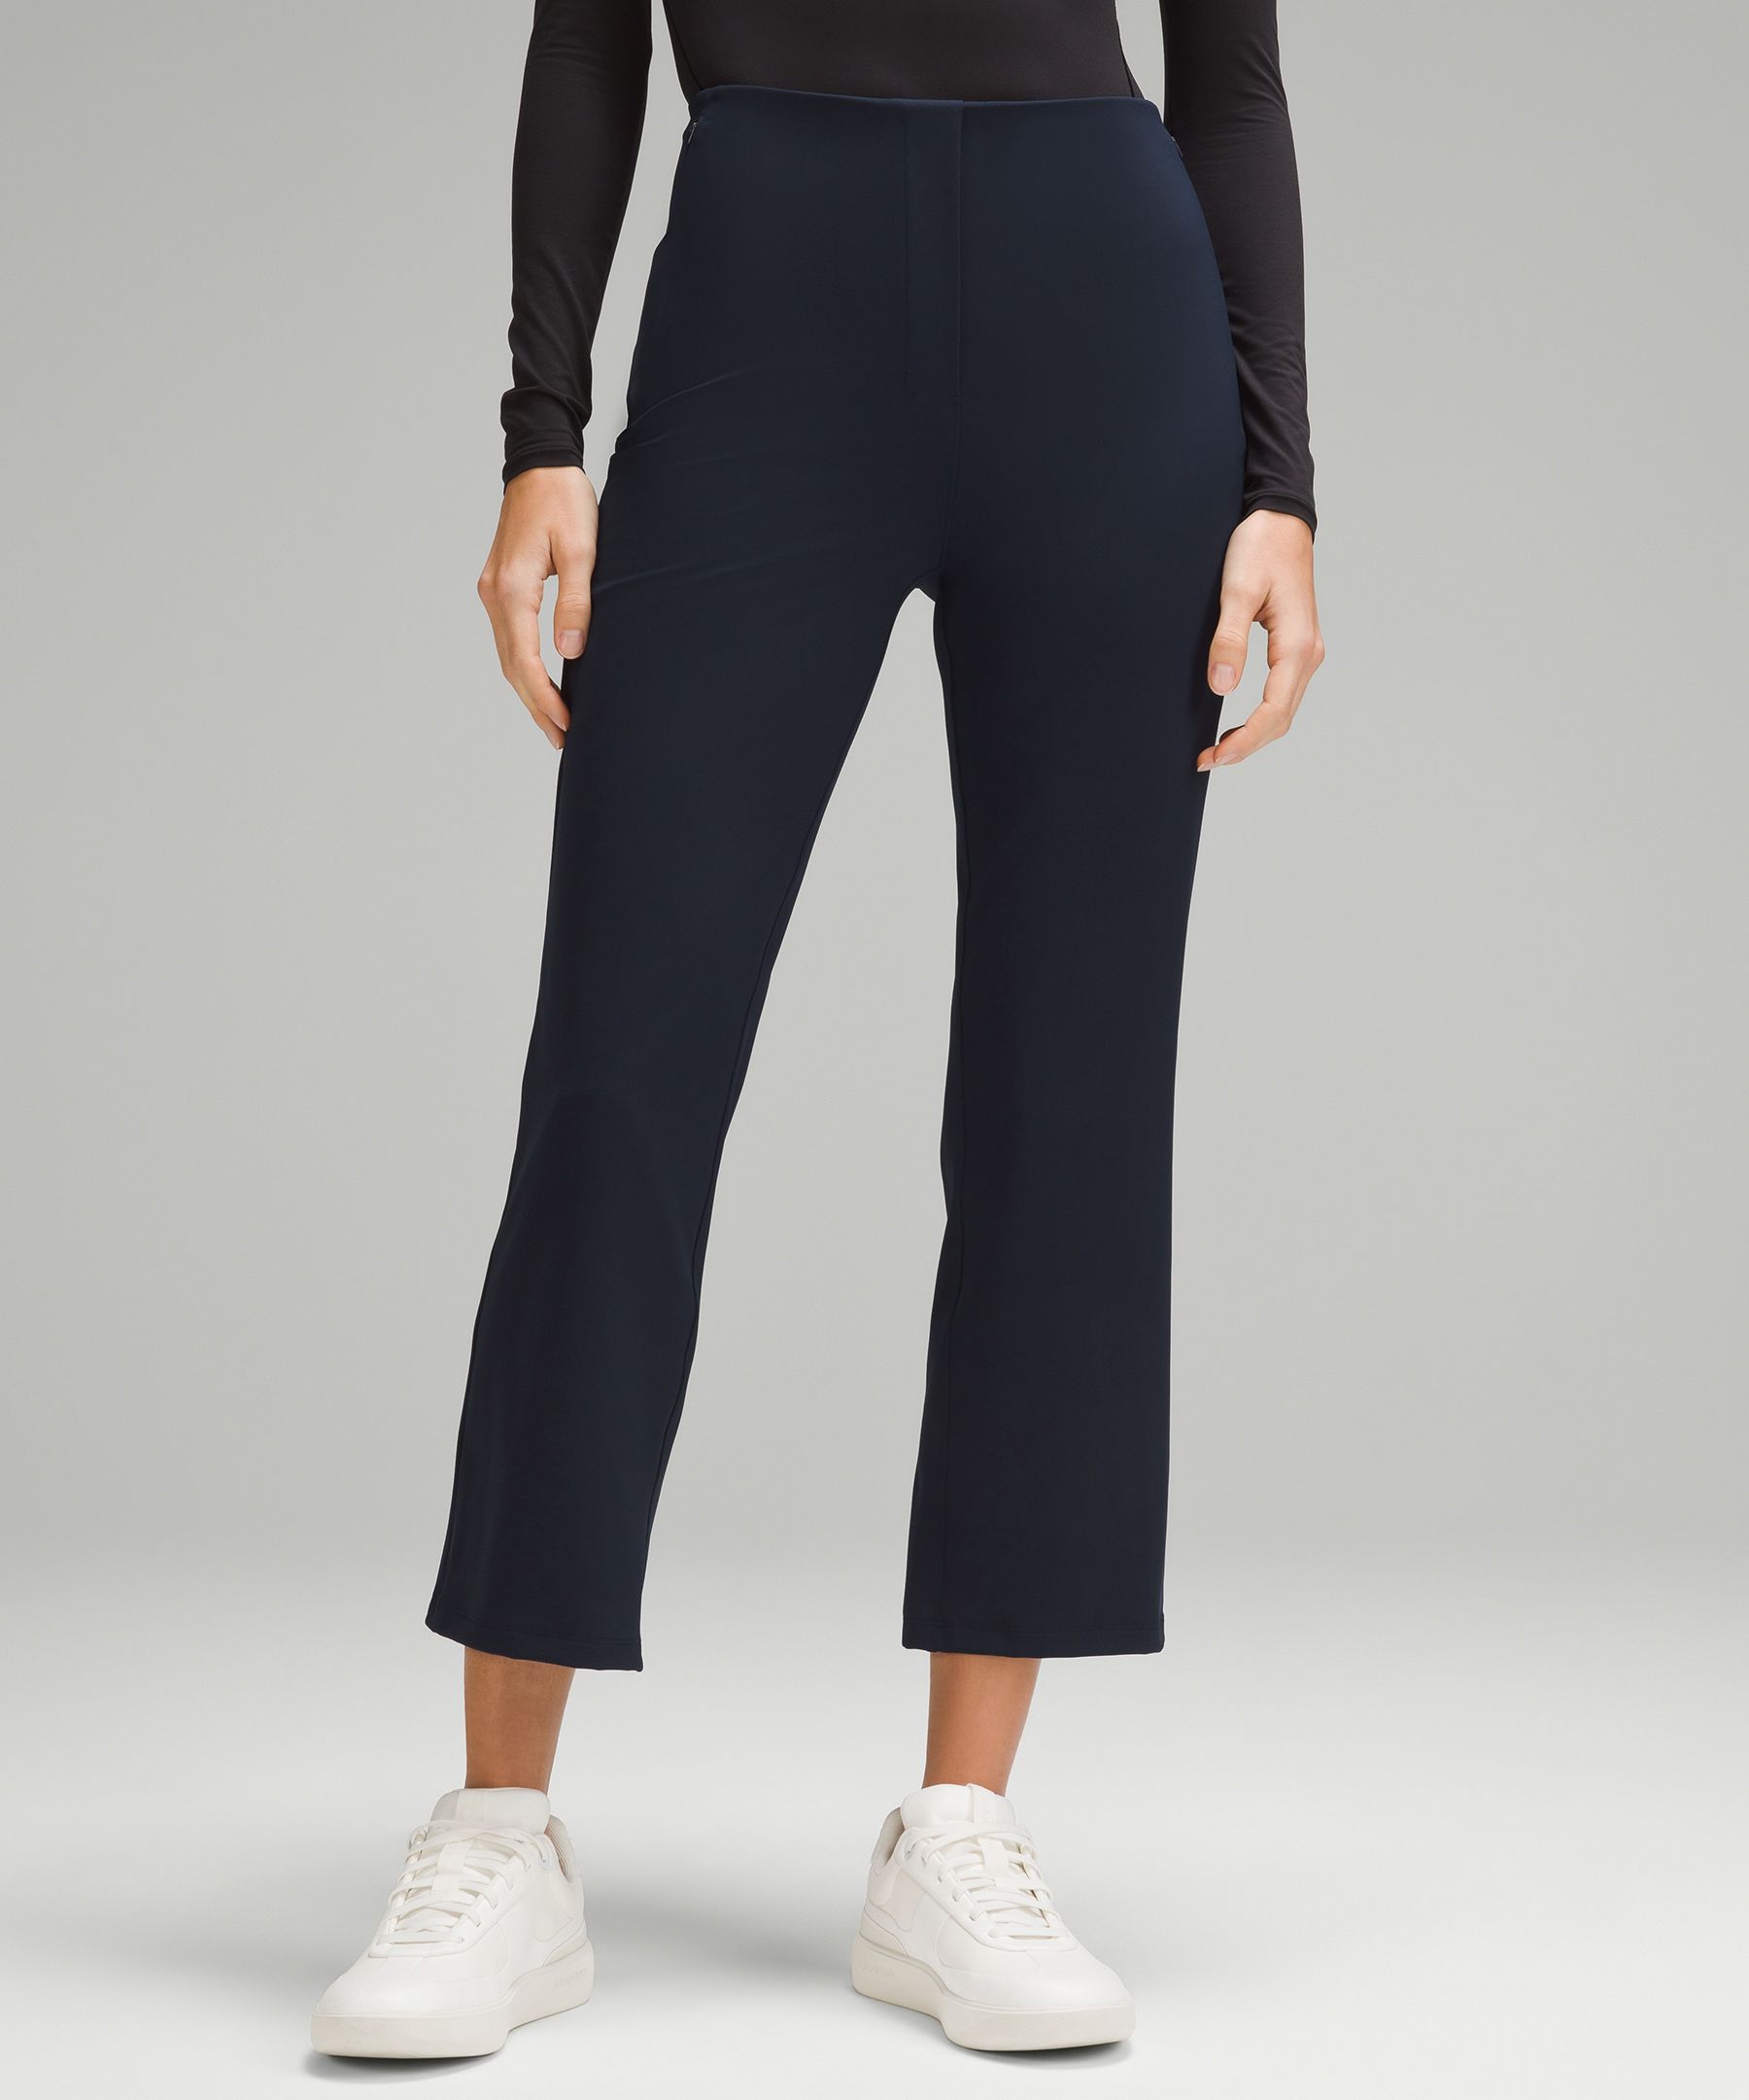 Lululemon Smooth Fit Pull-on High-rise Cropped Pants